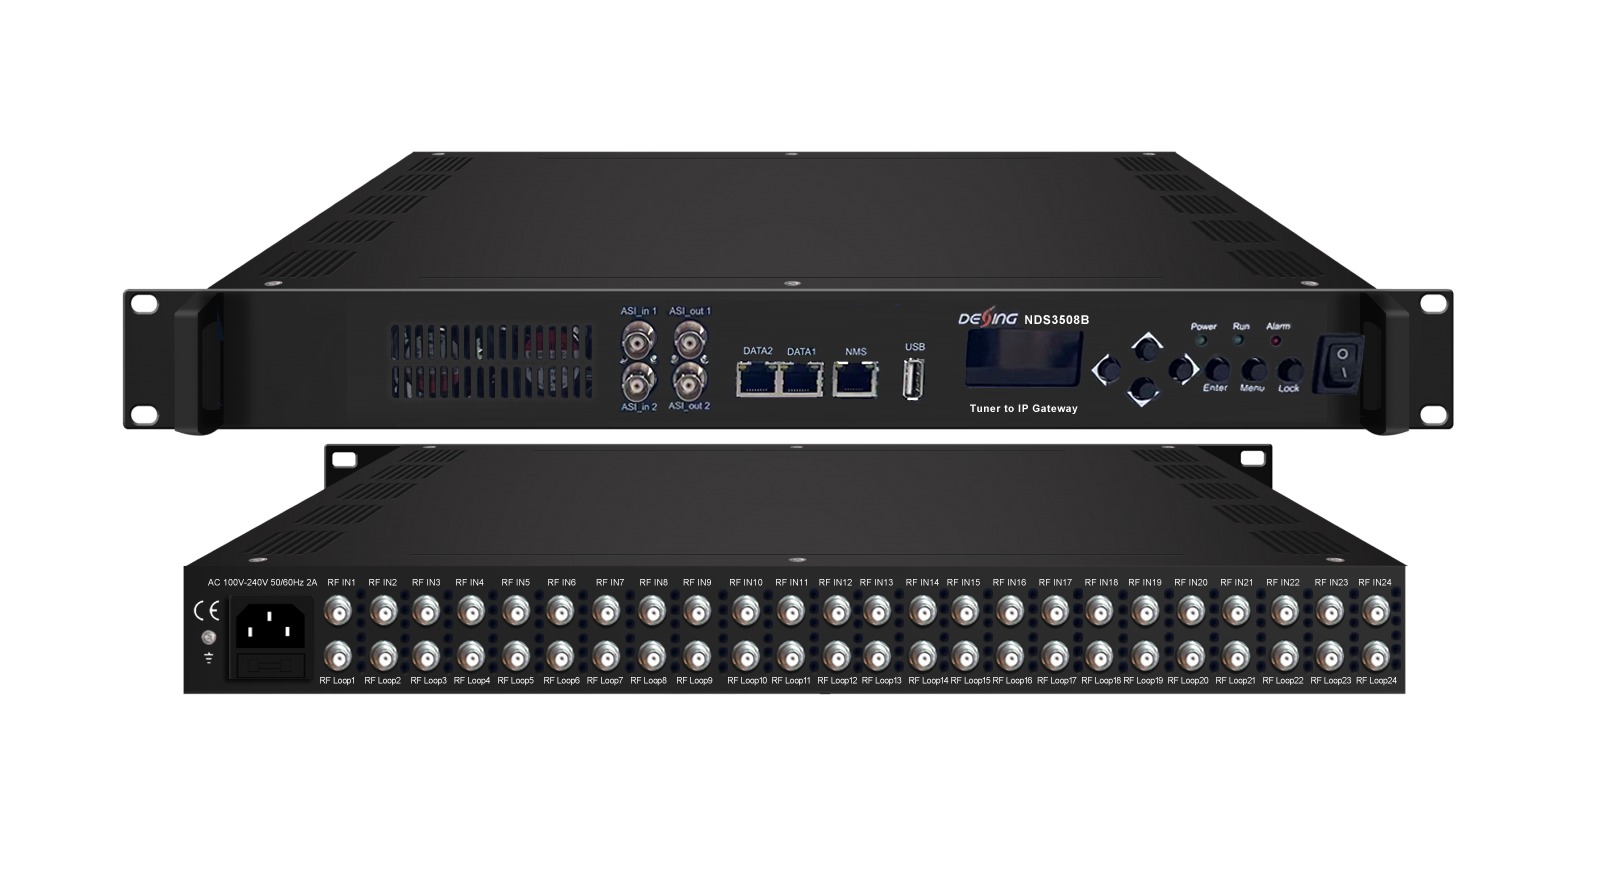 NDS3508B 24in1 Tuner to IP Gateway(V3)